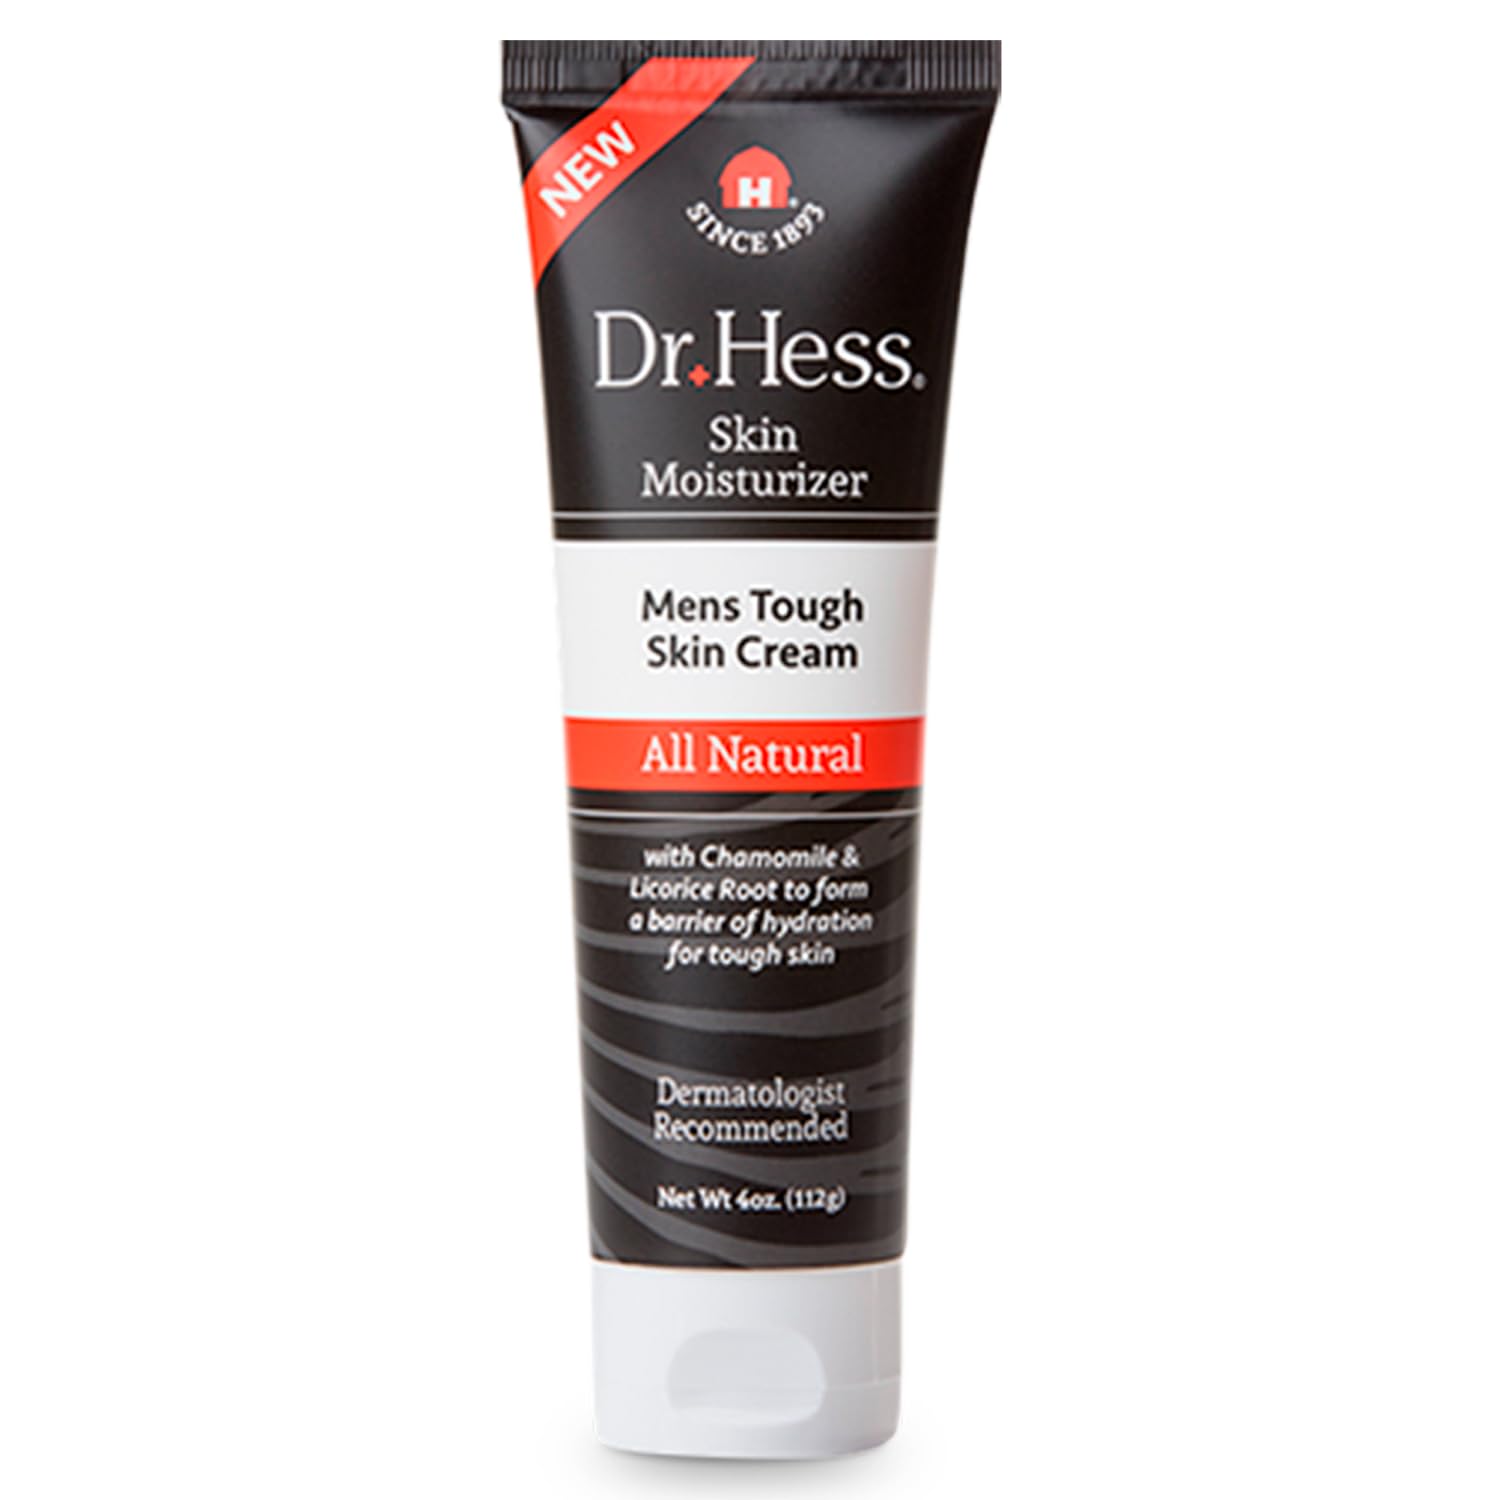 Dr Hess Mens Moisturizer, All Natural Tough Skin cream with Lanolin, Beeswax, Licorice Root & chamomile, Hand & Body Lotion to c